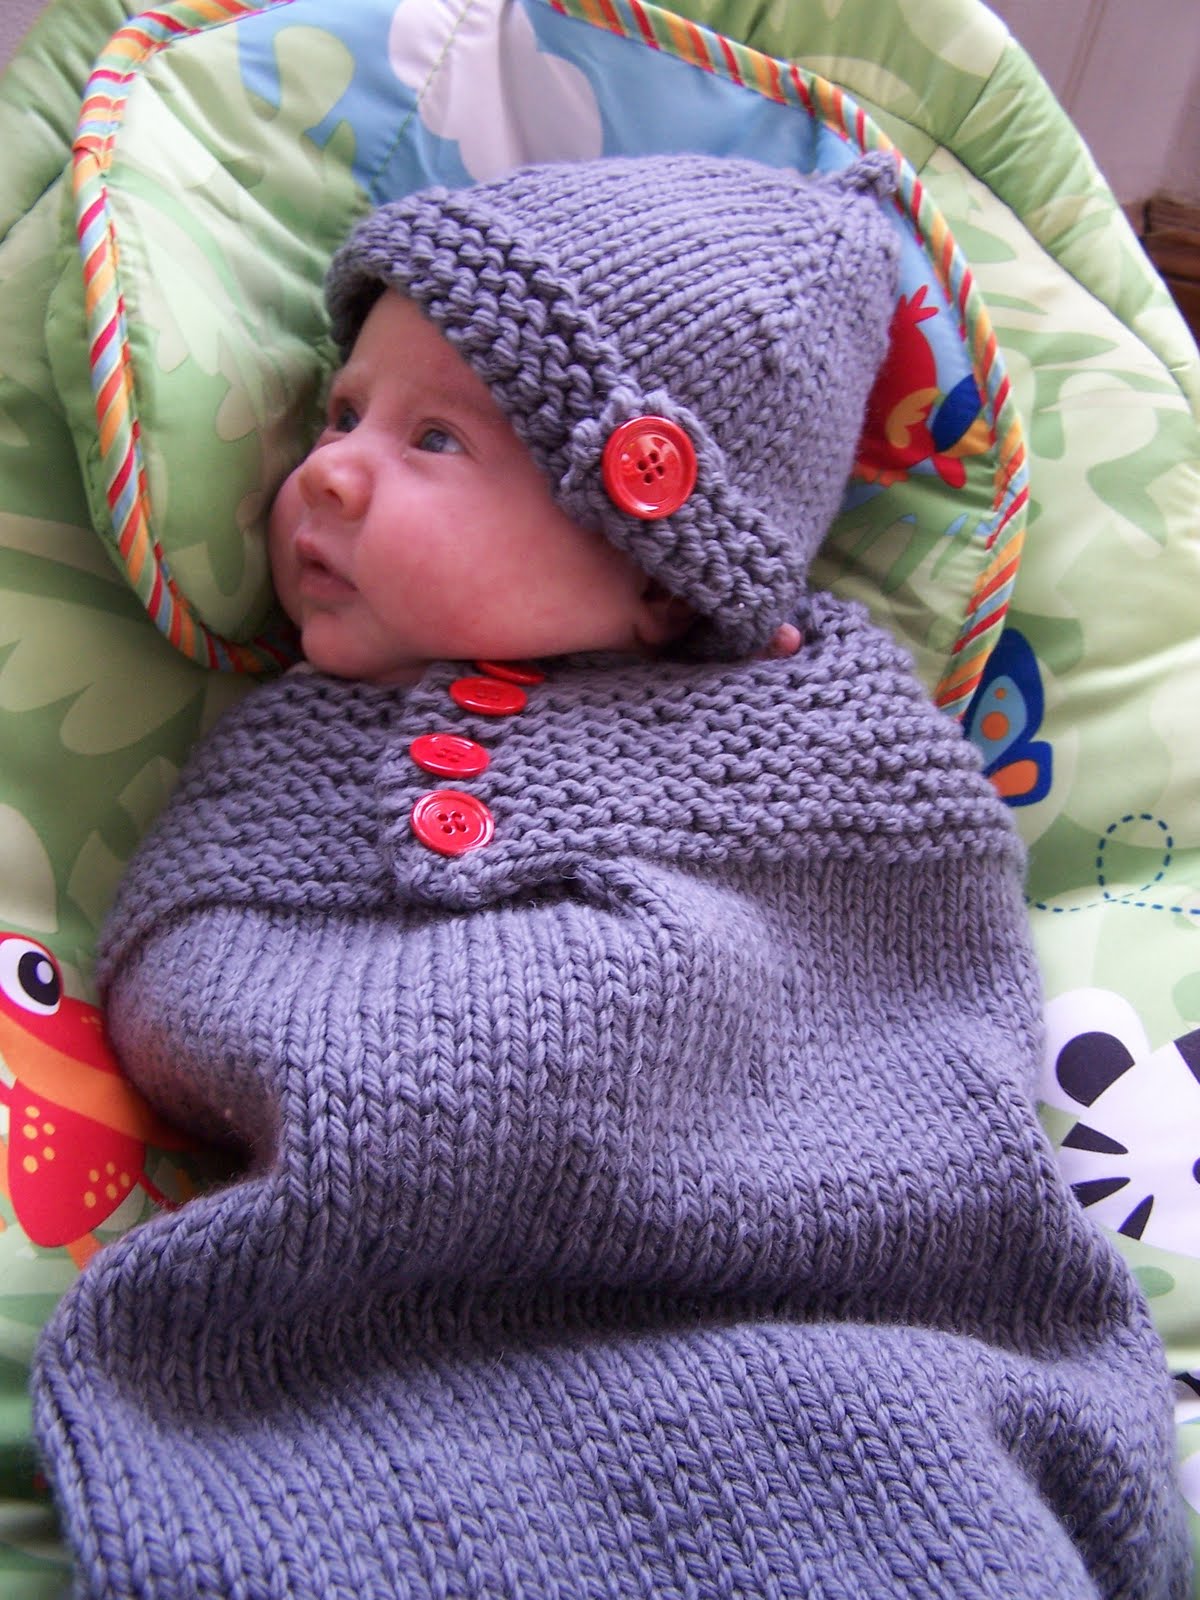 35+ Adorable Crochet and Knitted Baby Cocoon Patterns